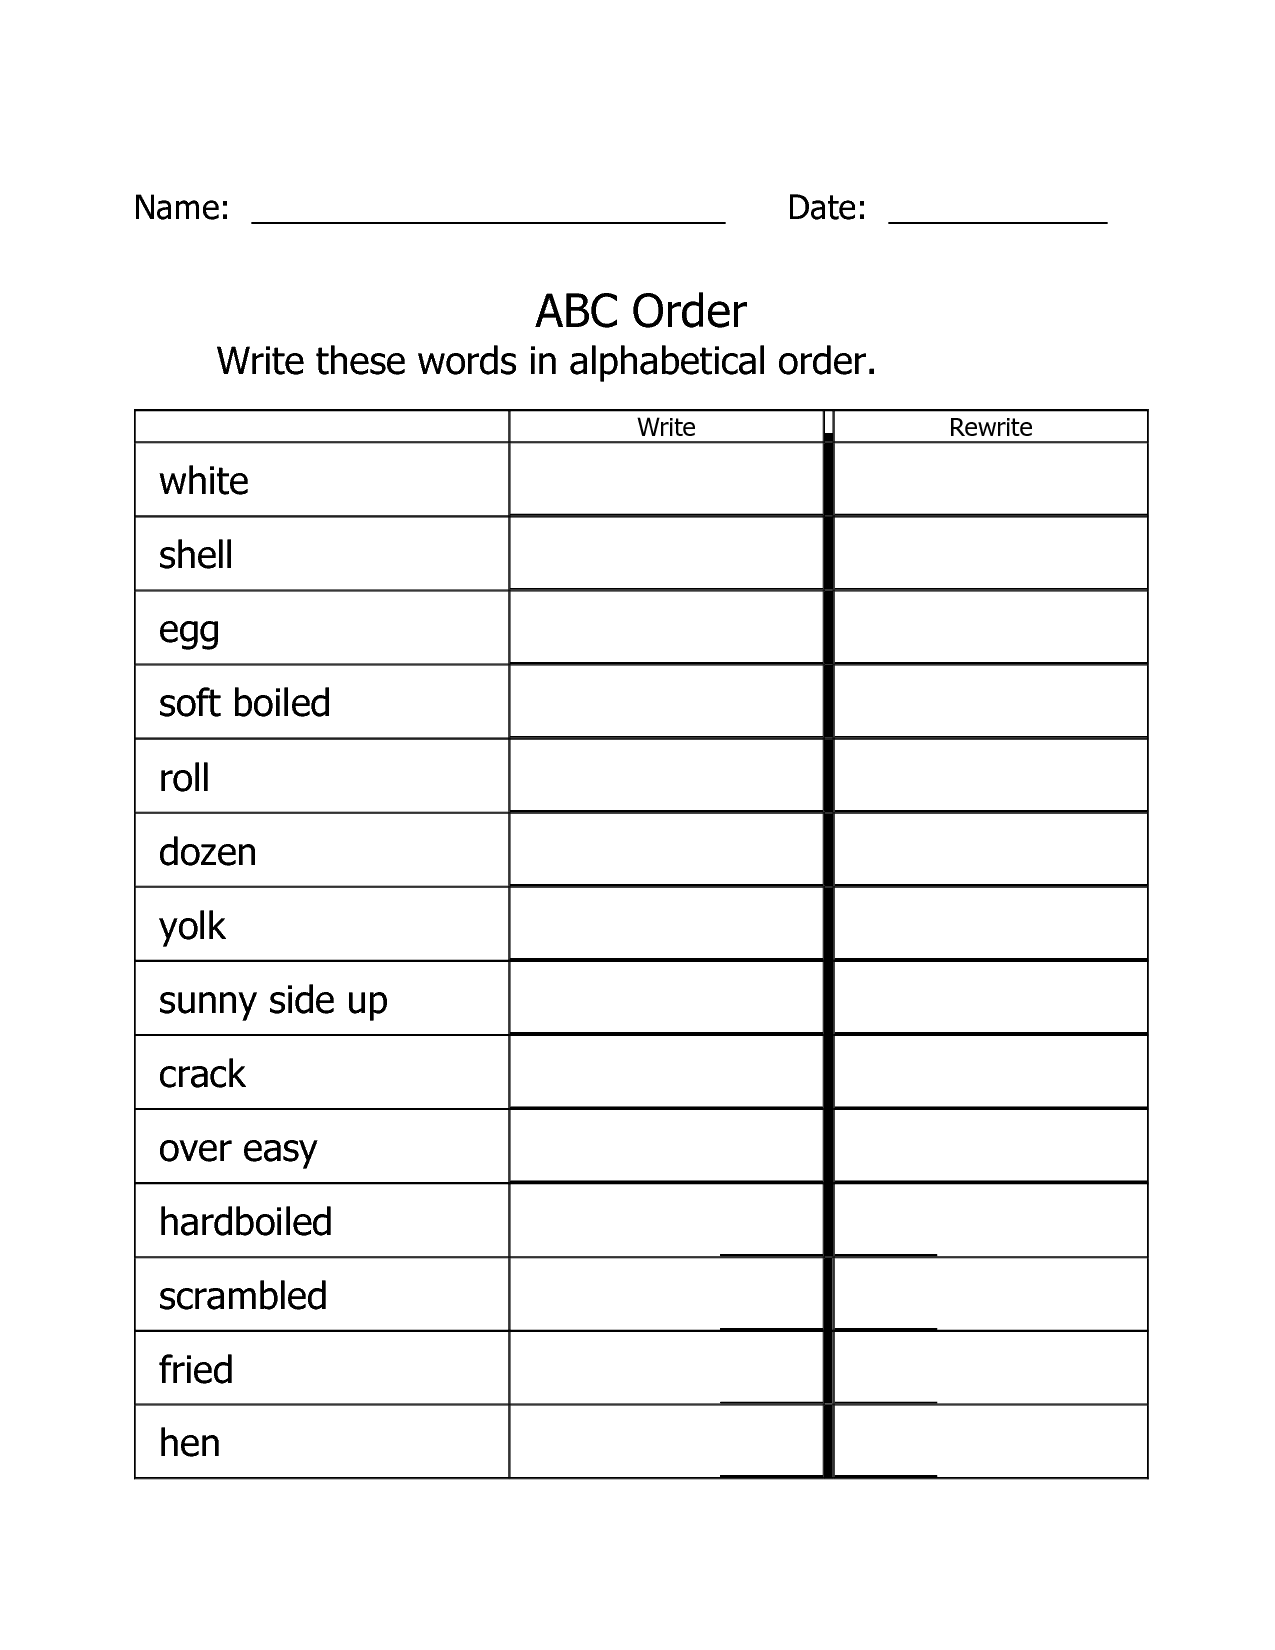 9-best-images-of-alphabetical-order-worksheets-abc-order-template